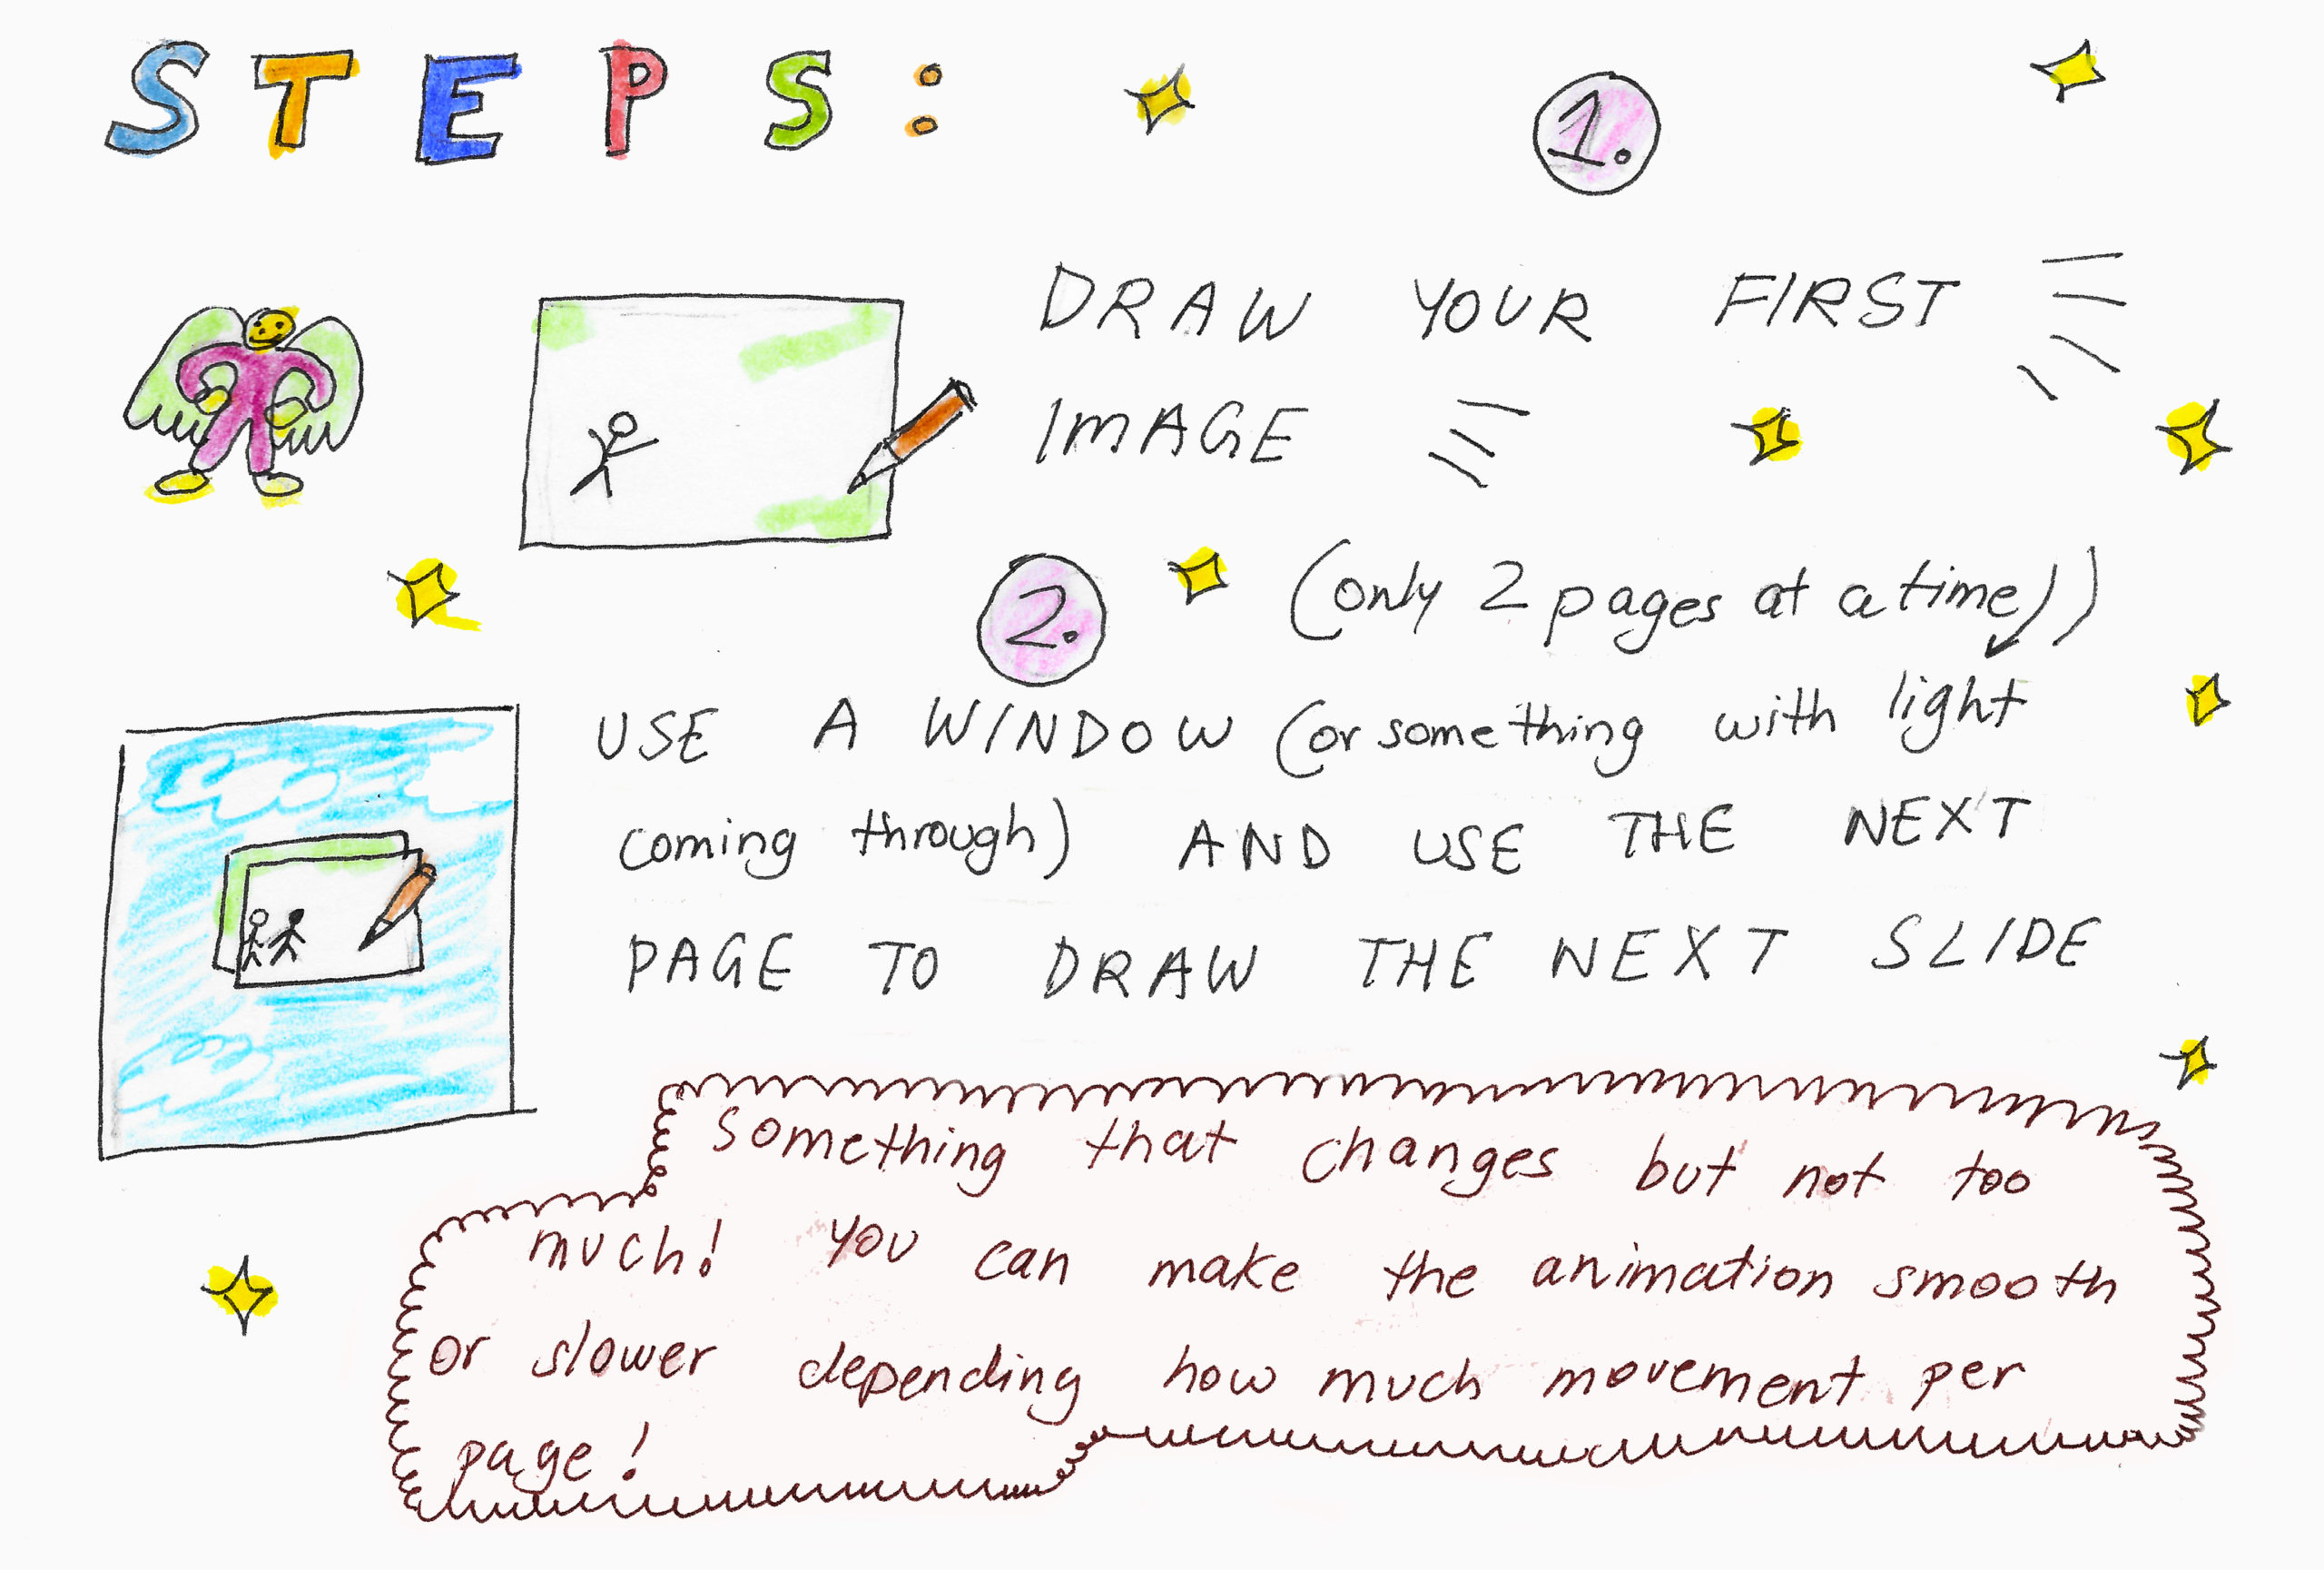 Steps:
1. Draw your first image
2. Use a window (or something with light coming through) and use the next page to draw the next slide (only 2 pages at a time!)
Something that changes but not too much! You can make the animation smooth or slower depending how much movement per page!